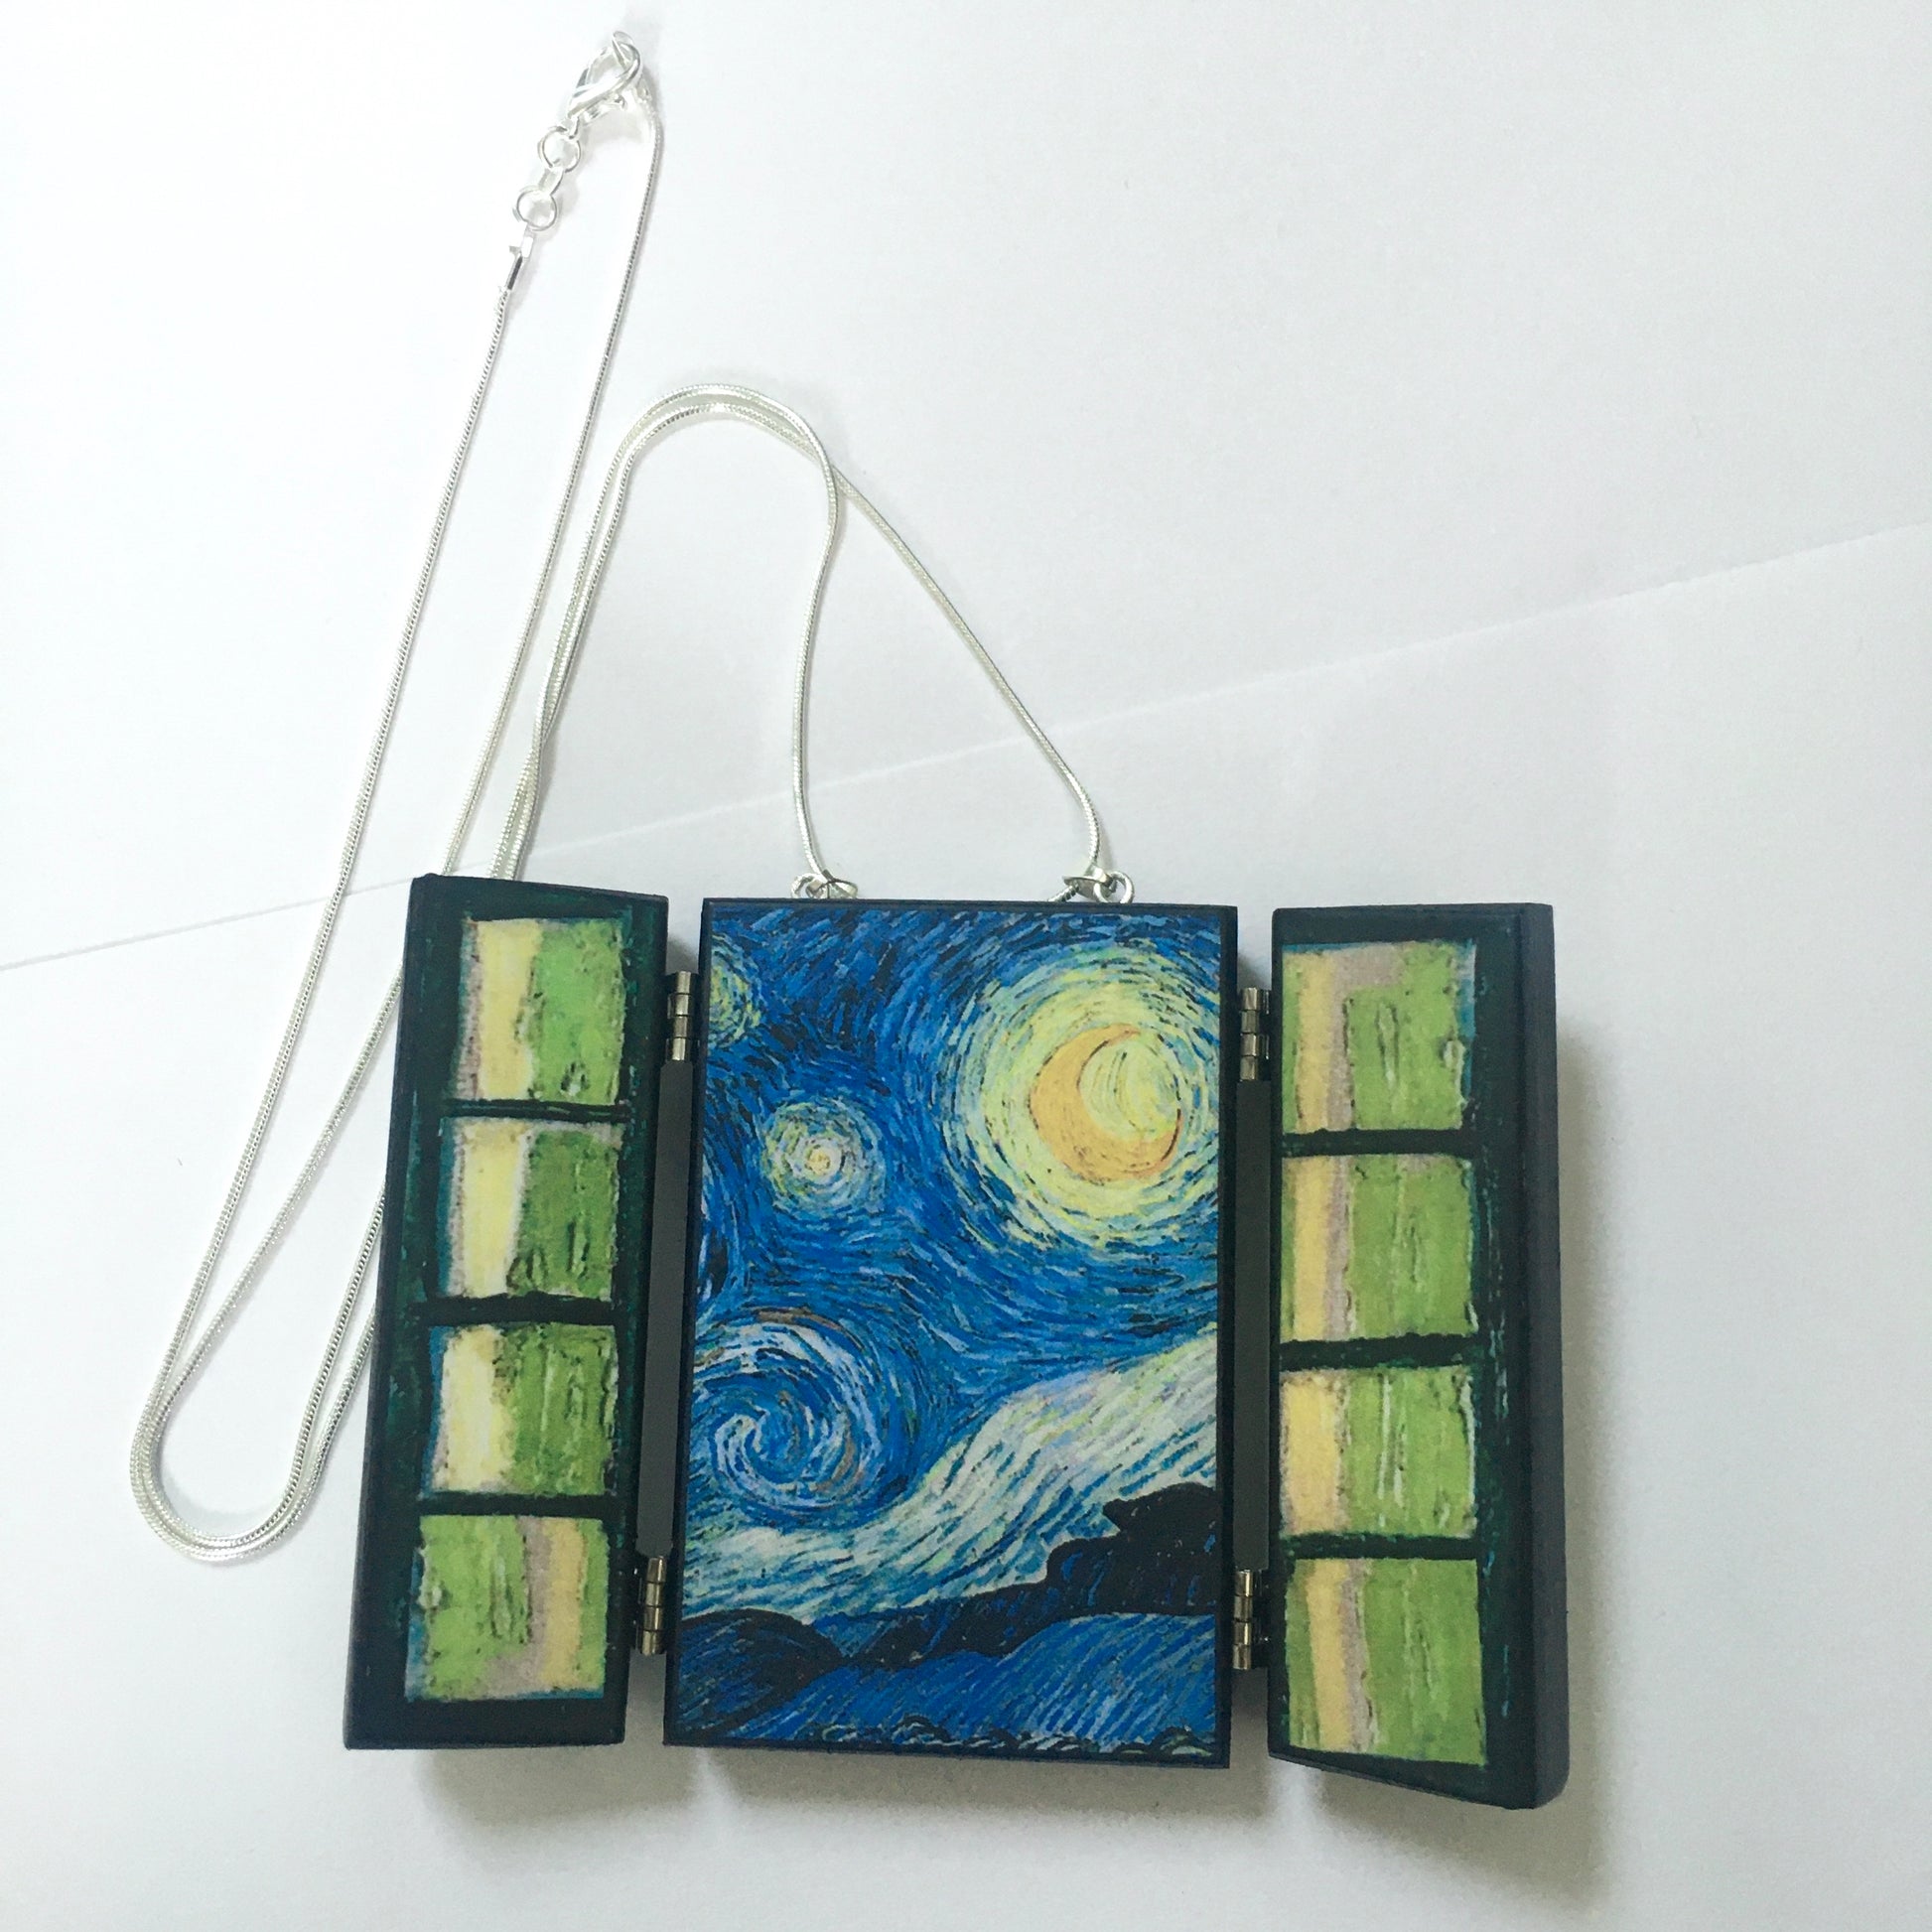 triptych art necklace inspired by Vincent Van Gogh post Impressionism paintings 